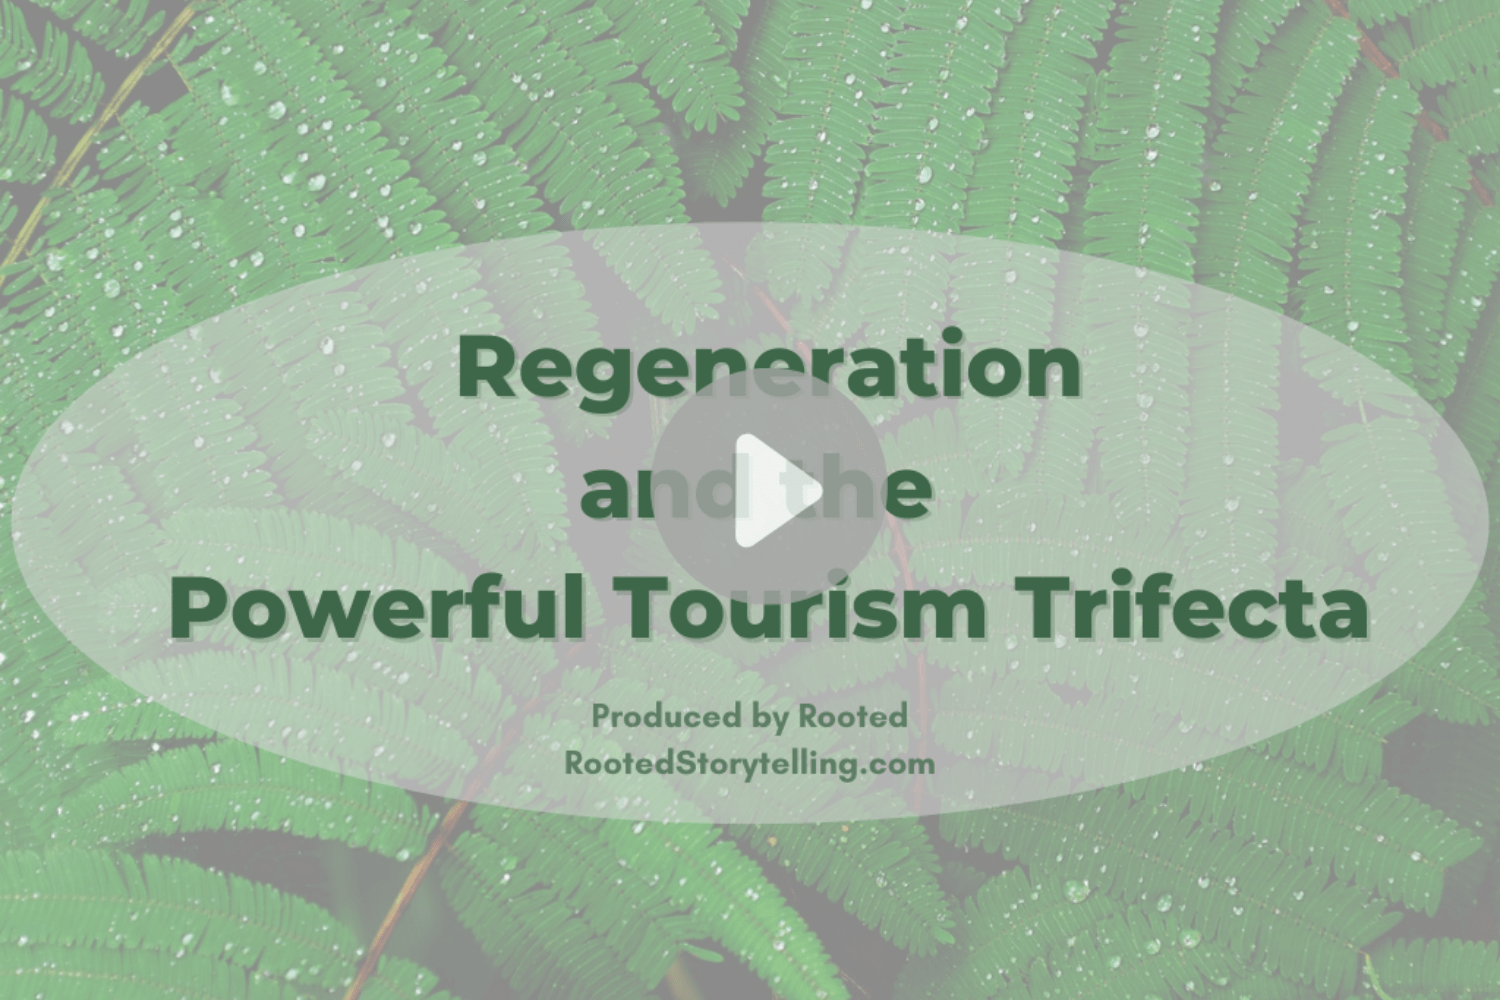 Regeneration and the Powerful Tourism Trifecta Webinar produced by Rooted